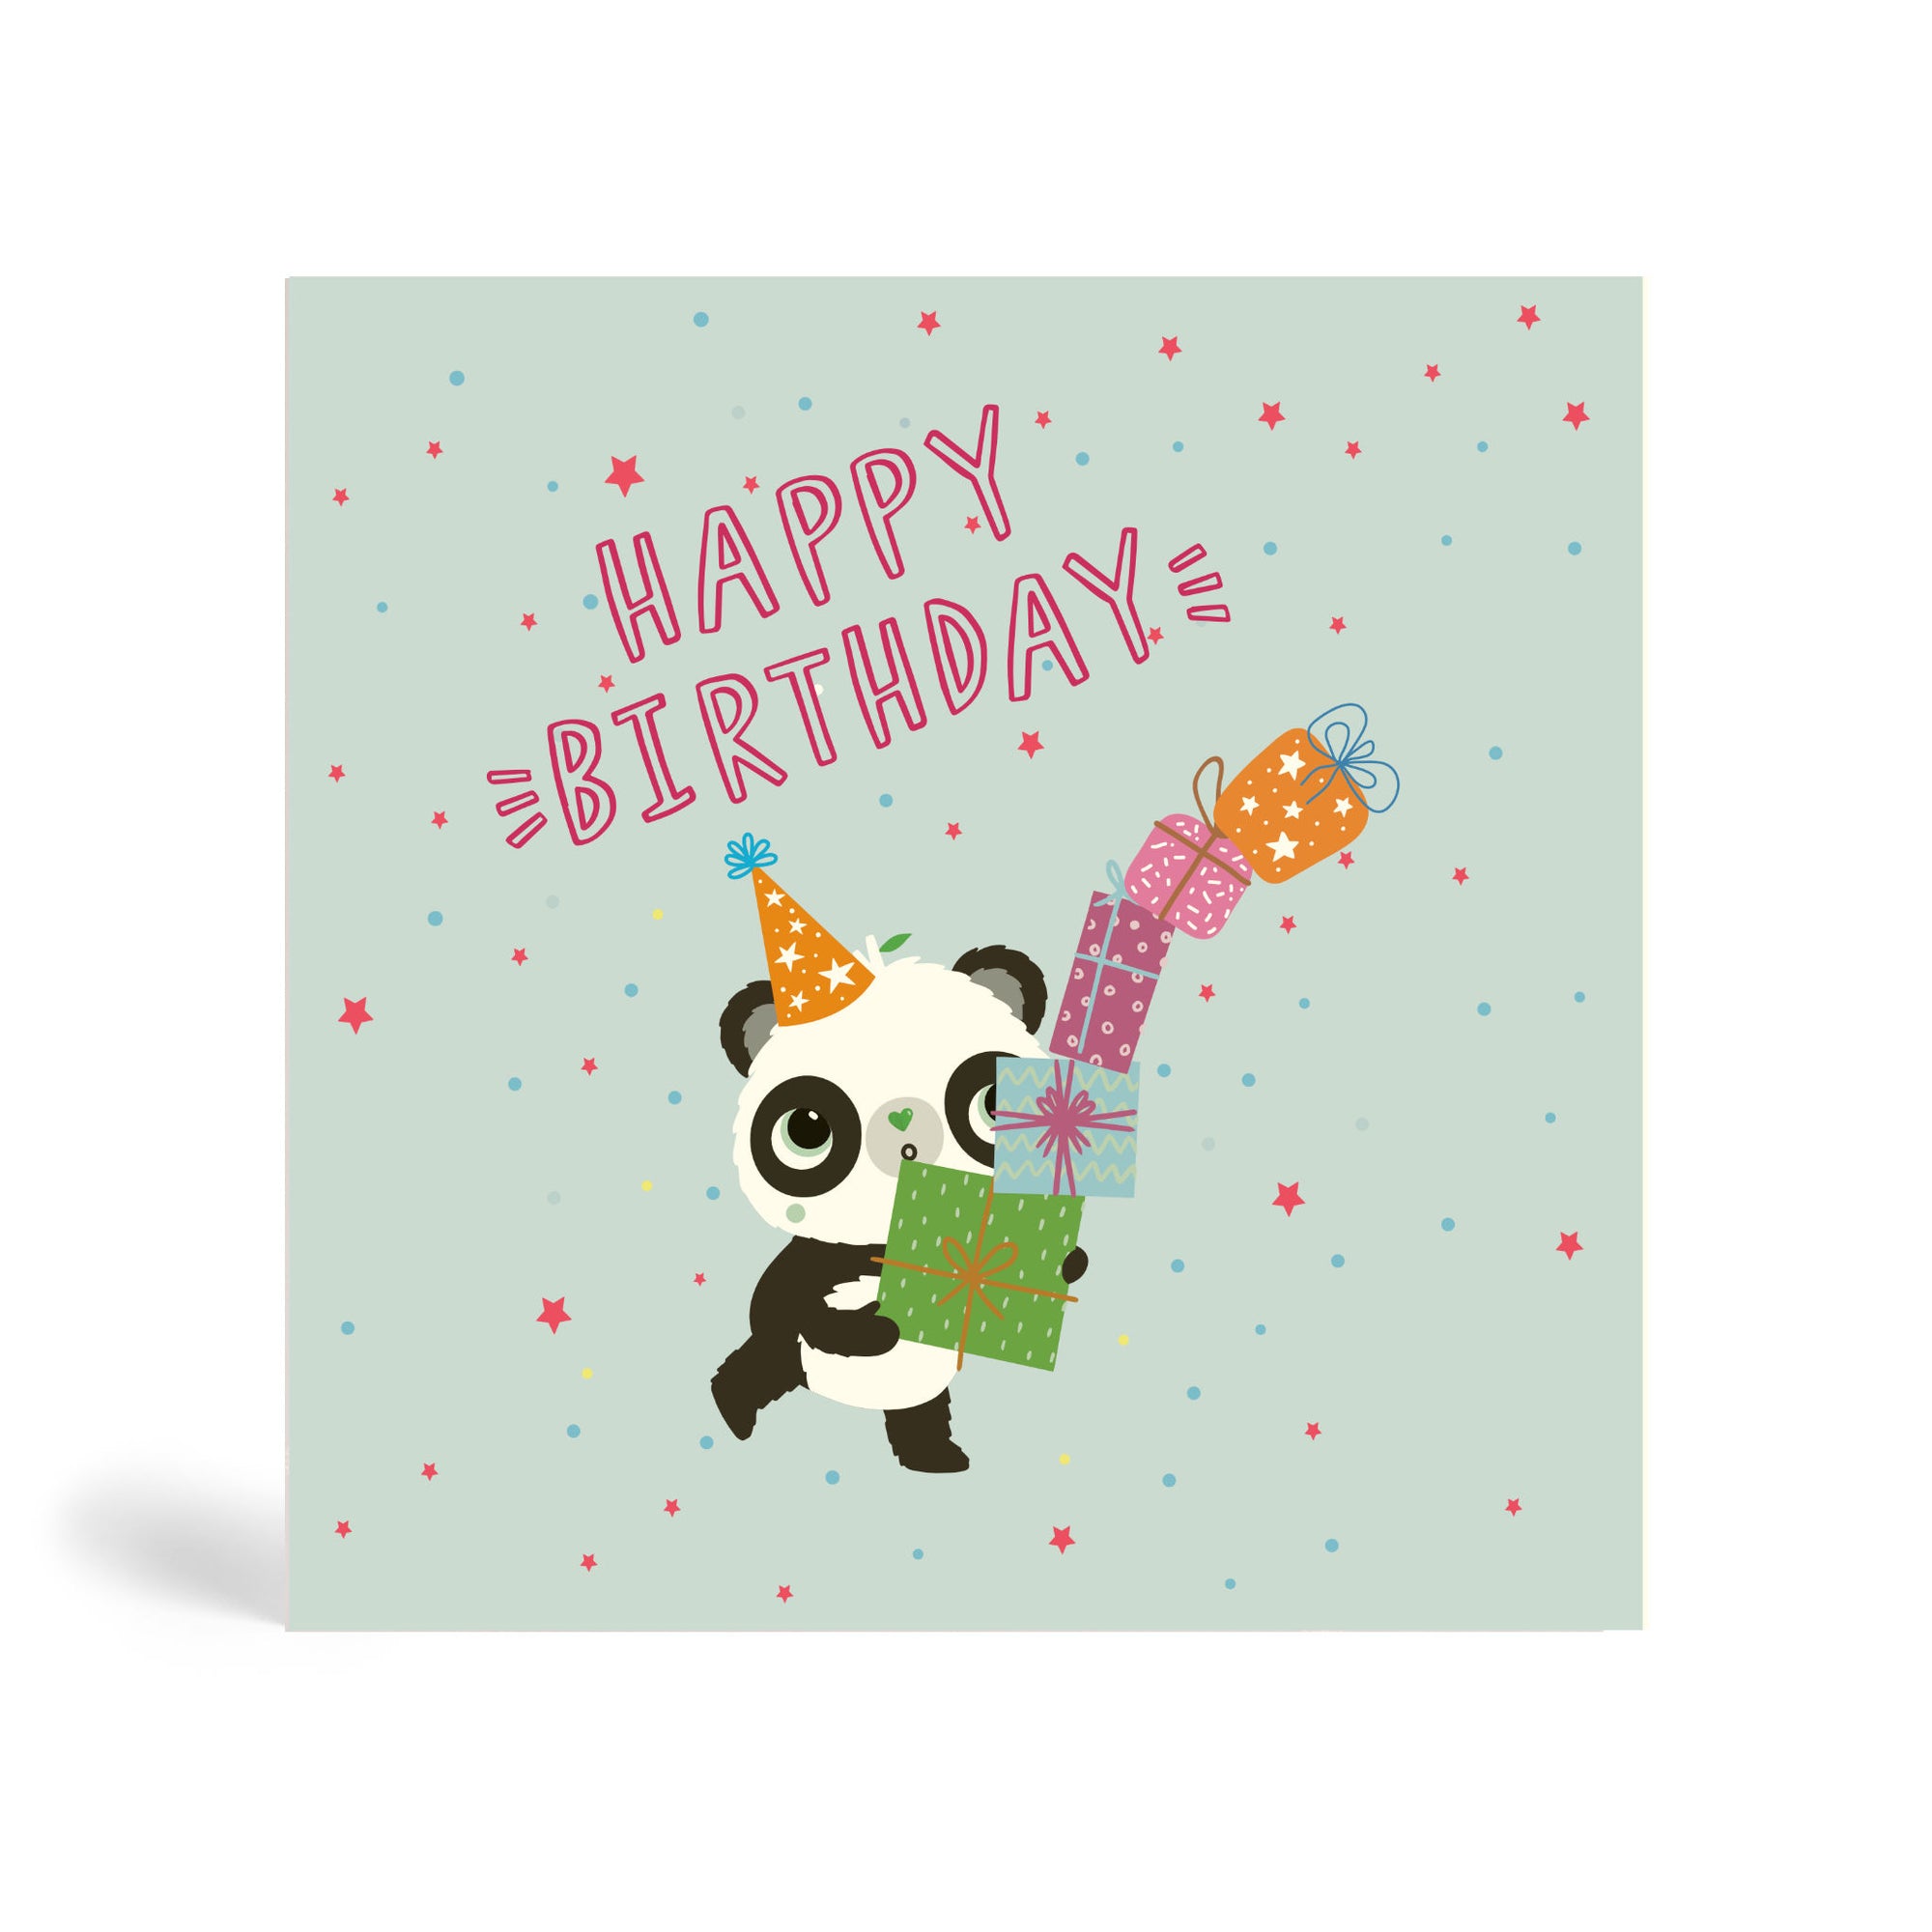 Blue 150mm square eco-friendly, tree free, happy birthday greeting card showing Panda wearing a party hat carrying piles of presents about to fall over with colourful stars in the background. The card says, Happy Birthday.